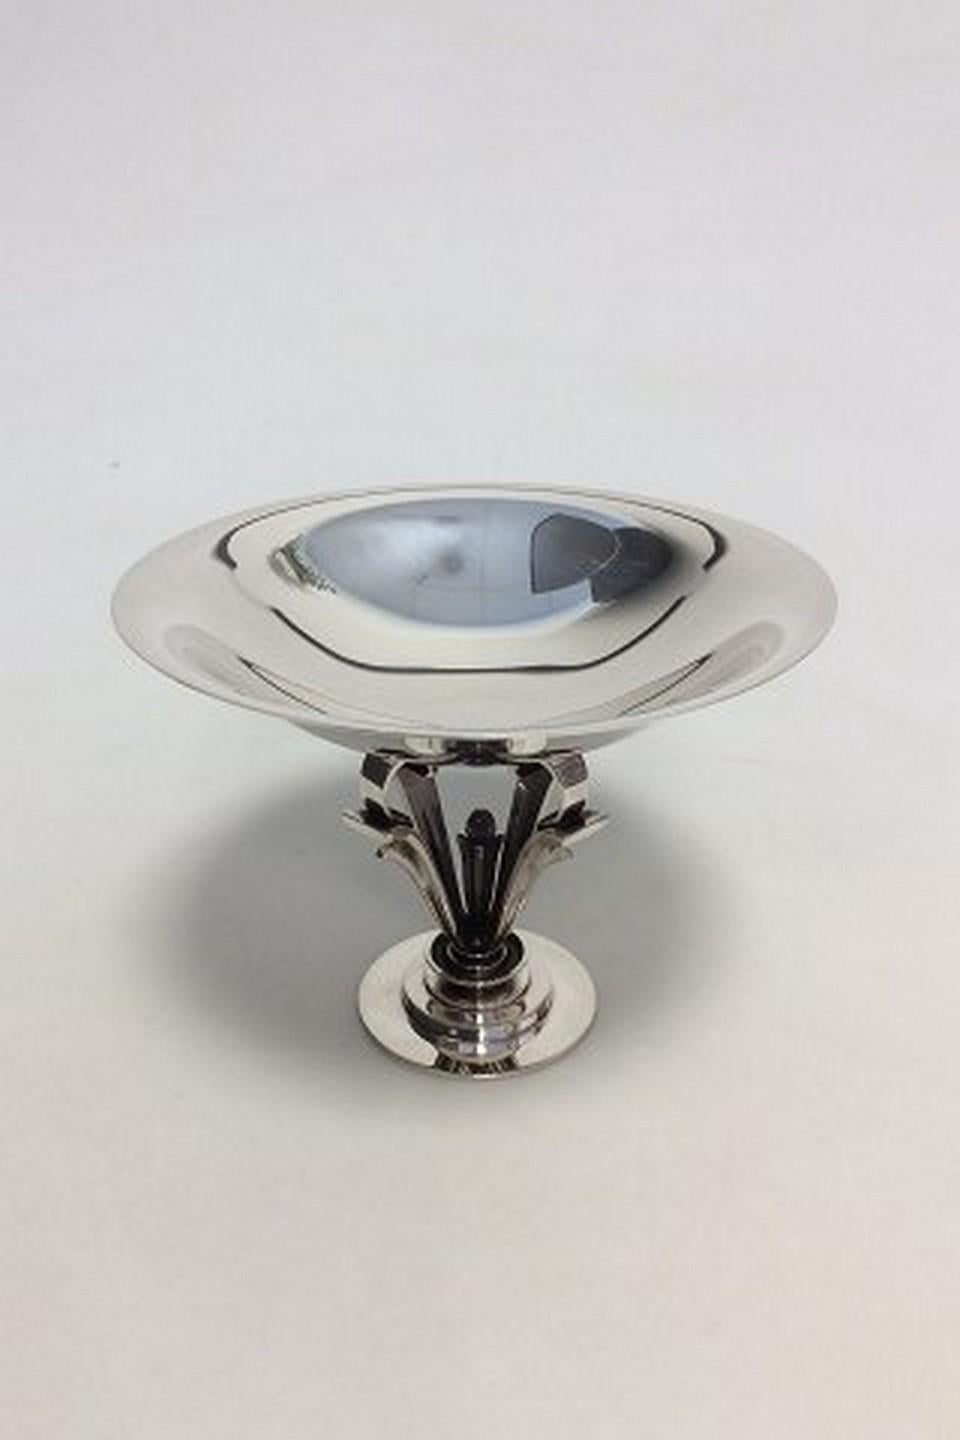 Art Deco Georg Jensen Pyramid Sterling Silver Pedestal Bowl by Harald Nielsen No 688 For Sale